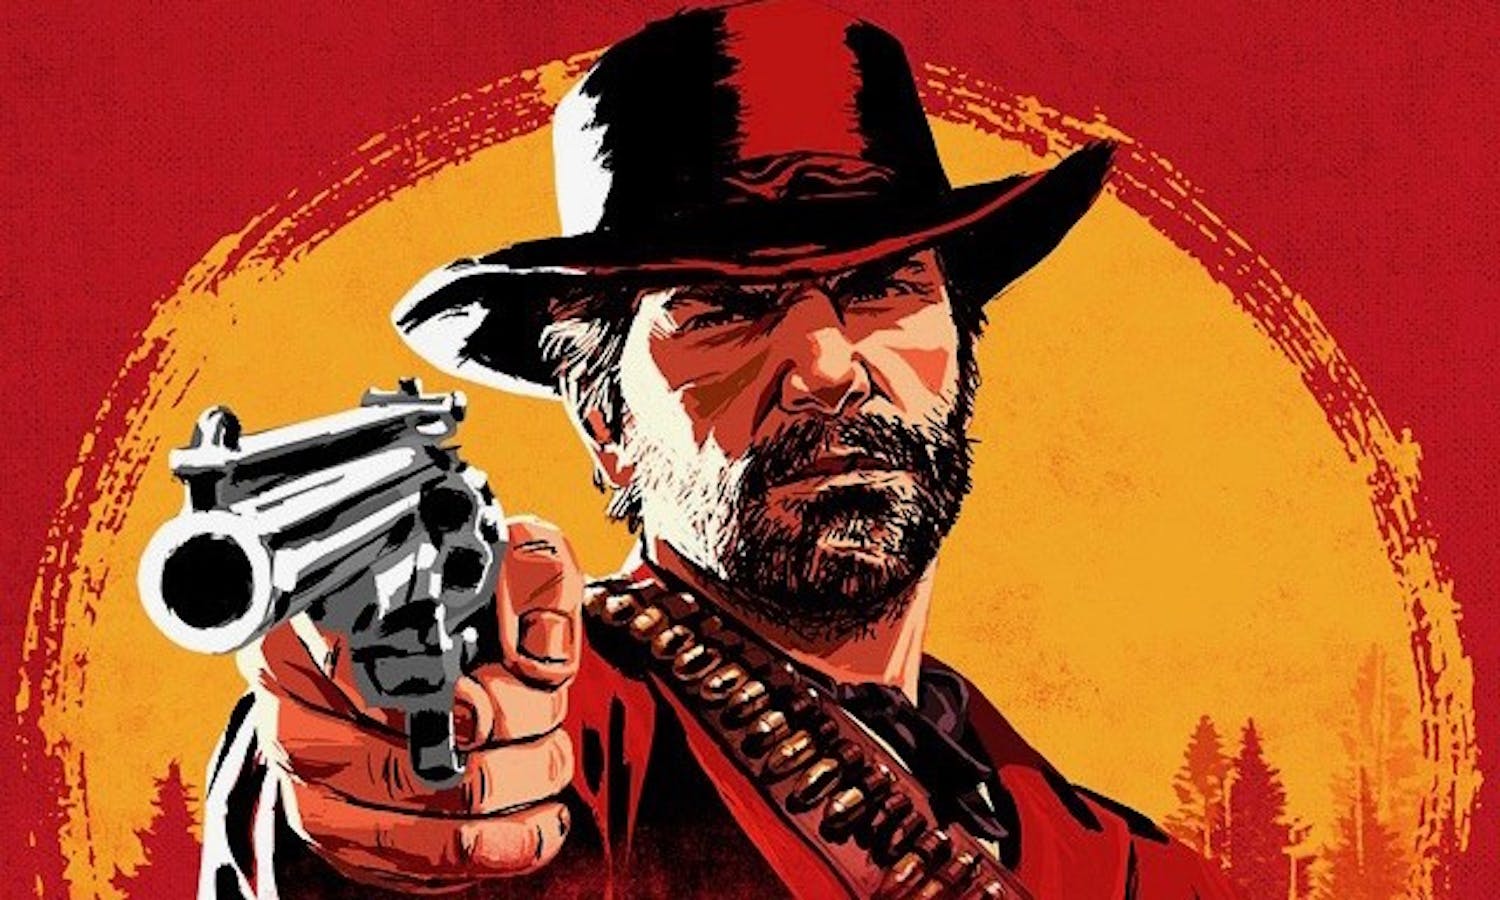 The open world Western game “Red Dead Redemption 2” is one of 2018’s most-anticipated releases.